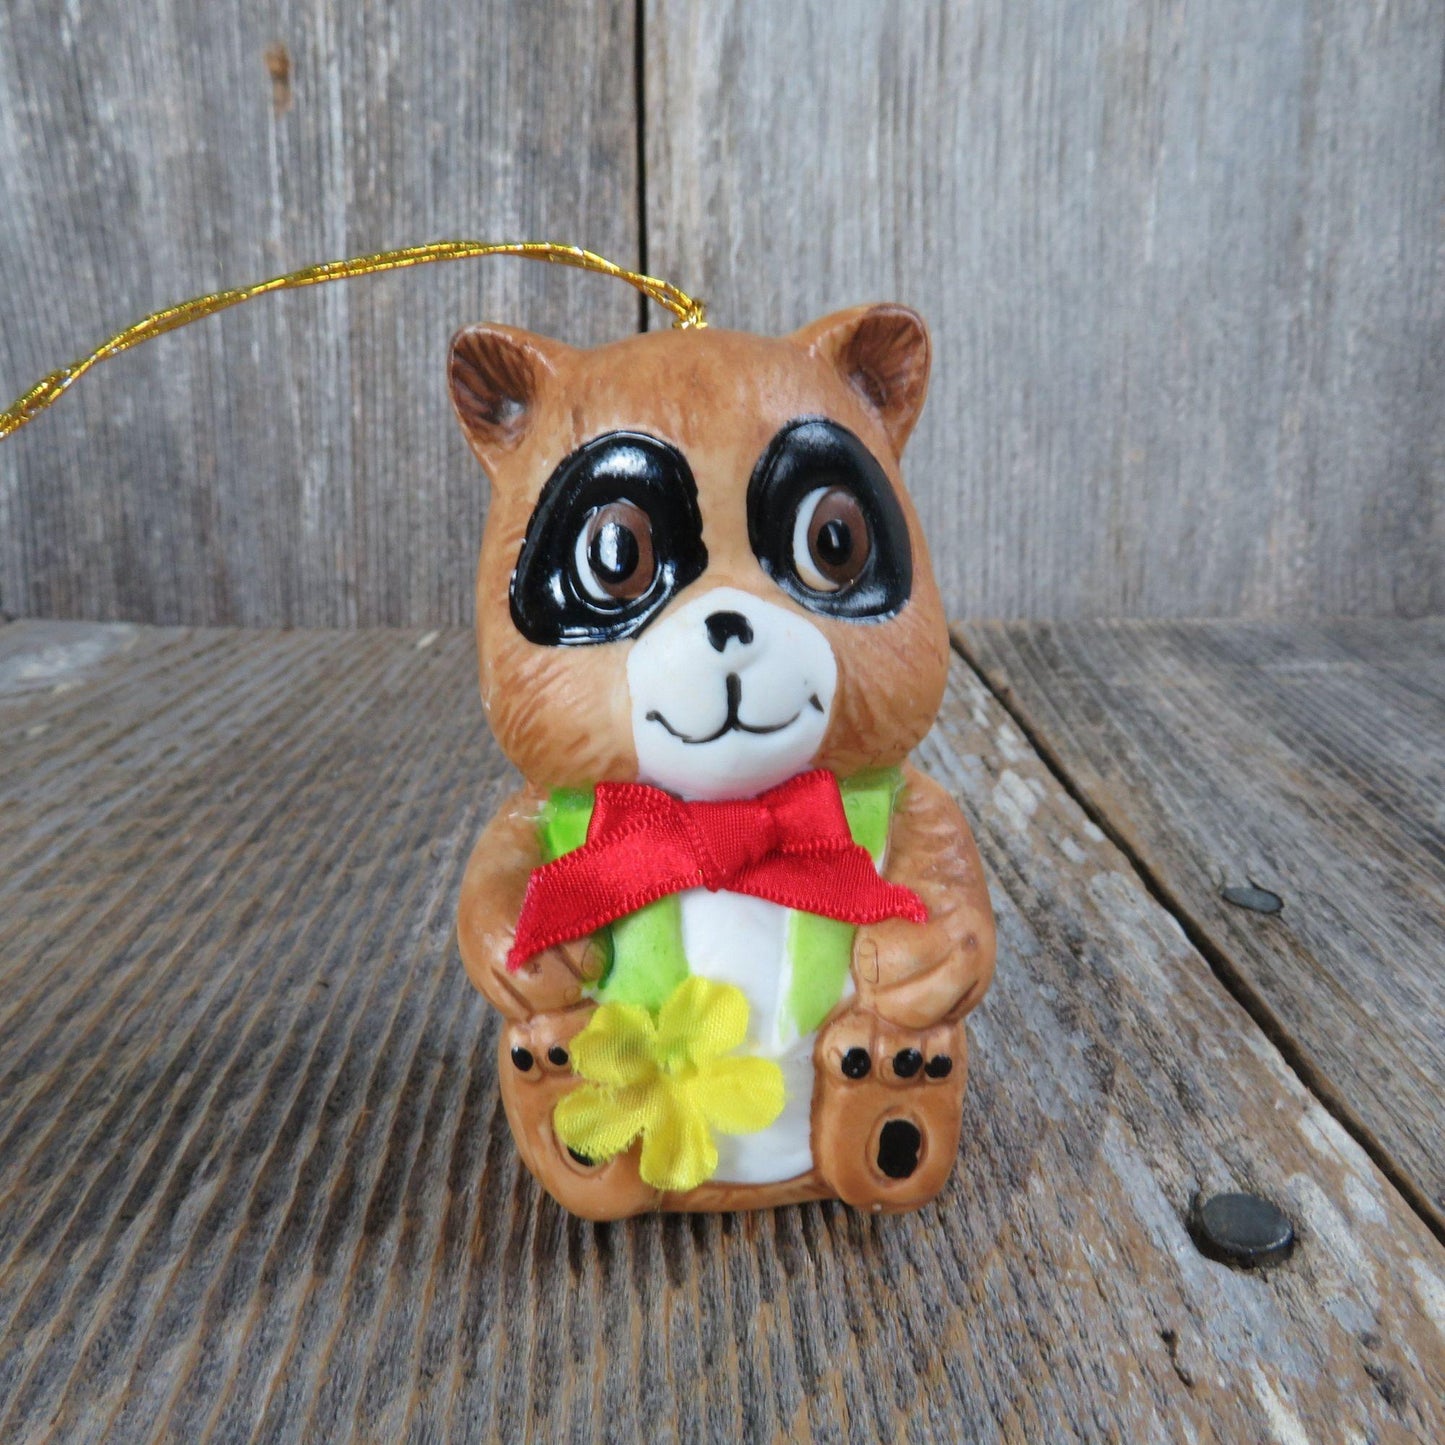 Vintage Raccoon Bell Ornament Christmas Giftco Ceramic Porcelain Taiwan Flower Bow